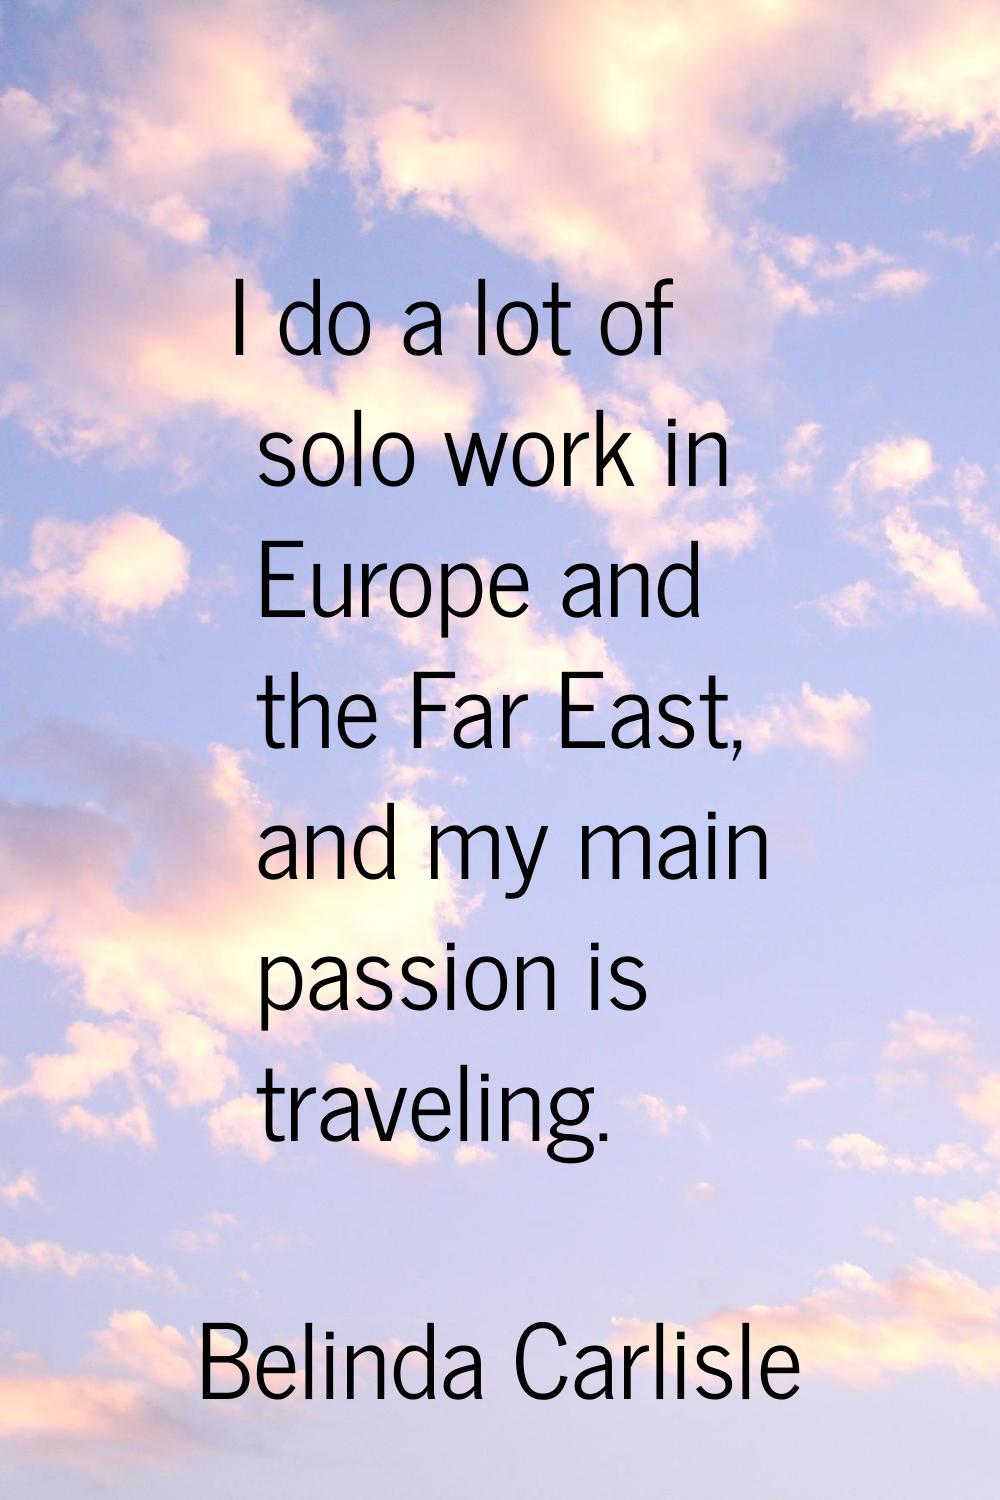 I do a lot of solo work in Europe and the Far East, and my main passion is traveling.